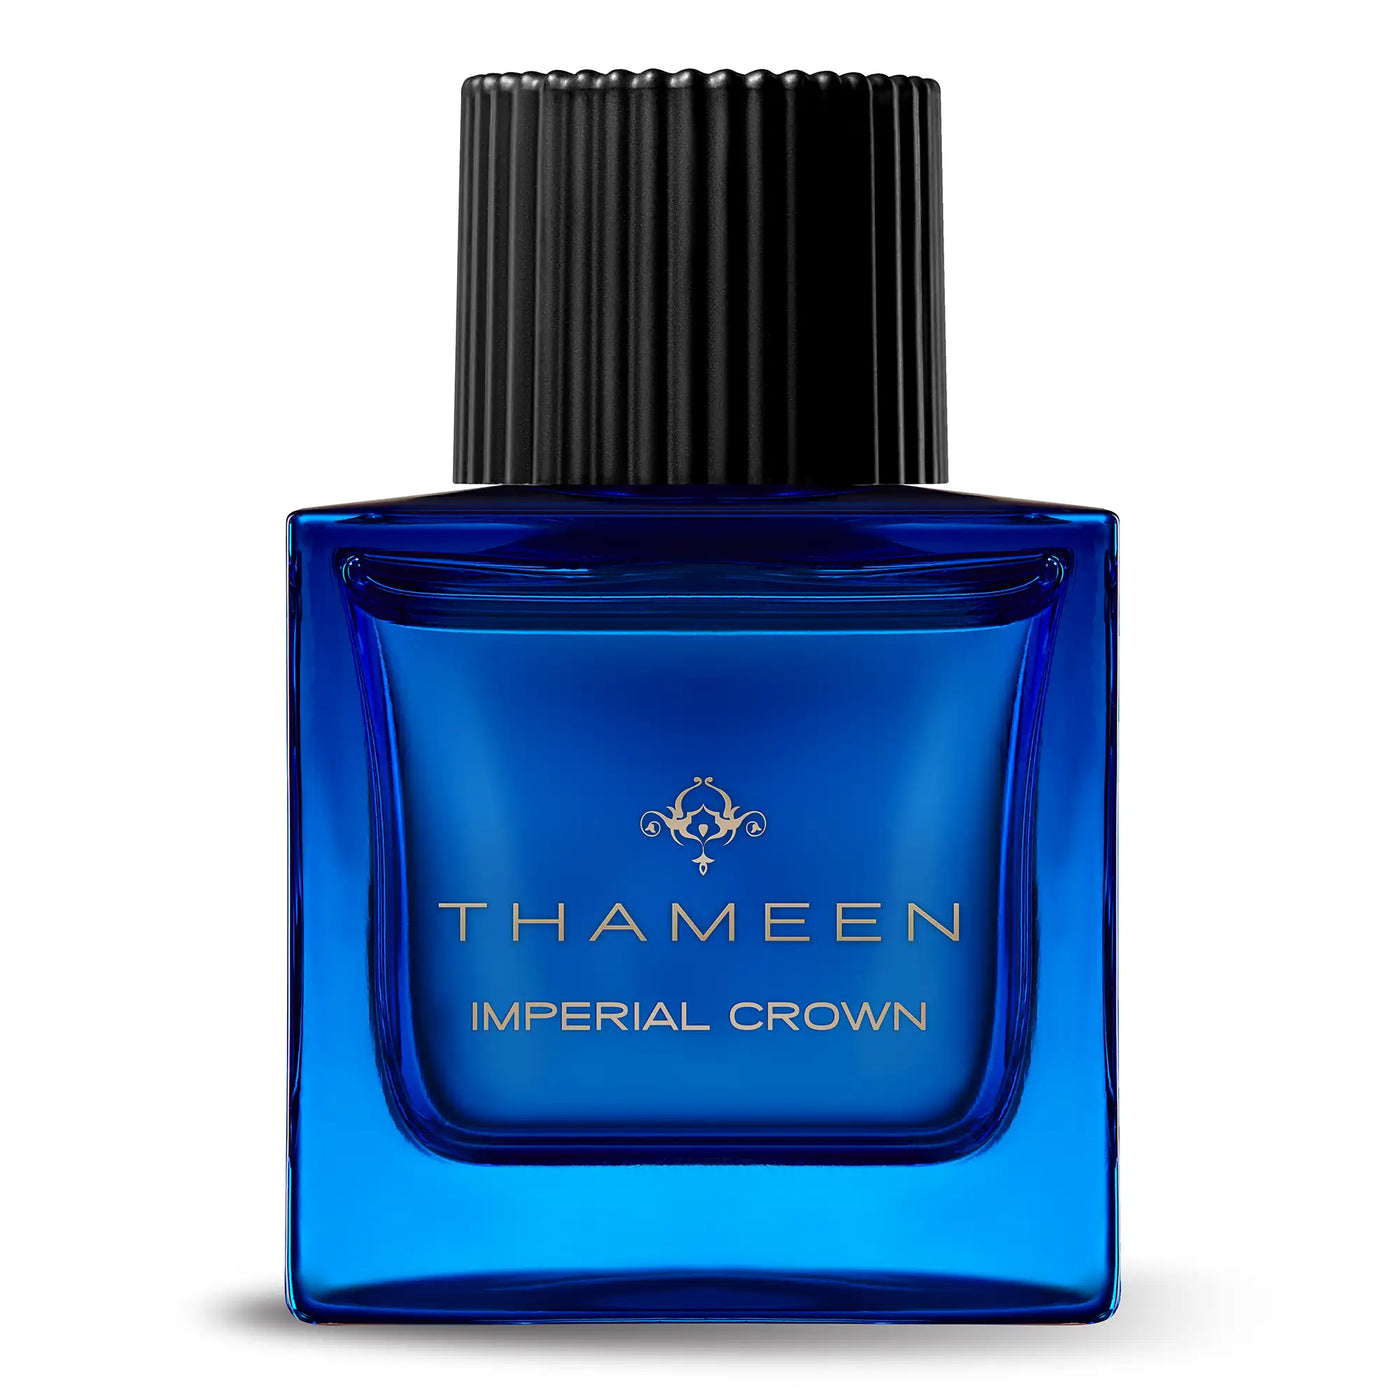 Thameen London Imperial Crown - 50ml - Gharyal by Collectibles 